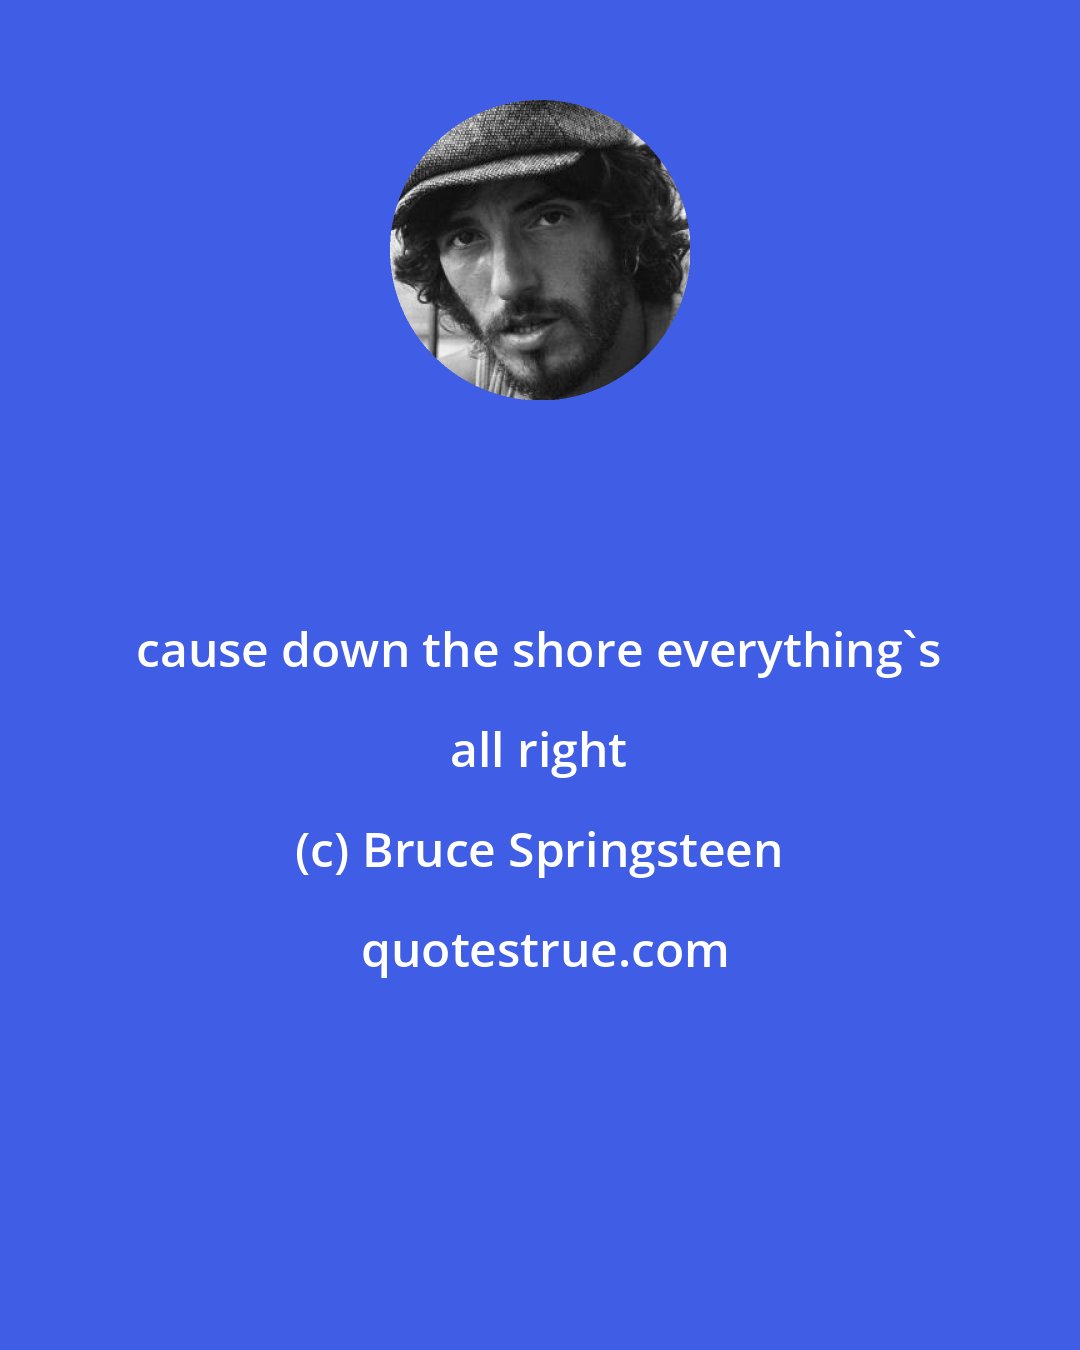 Bruce Springsteen: cause down the shore everything's all right